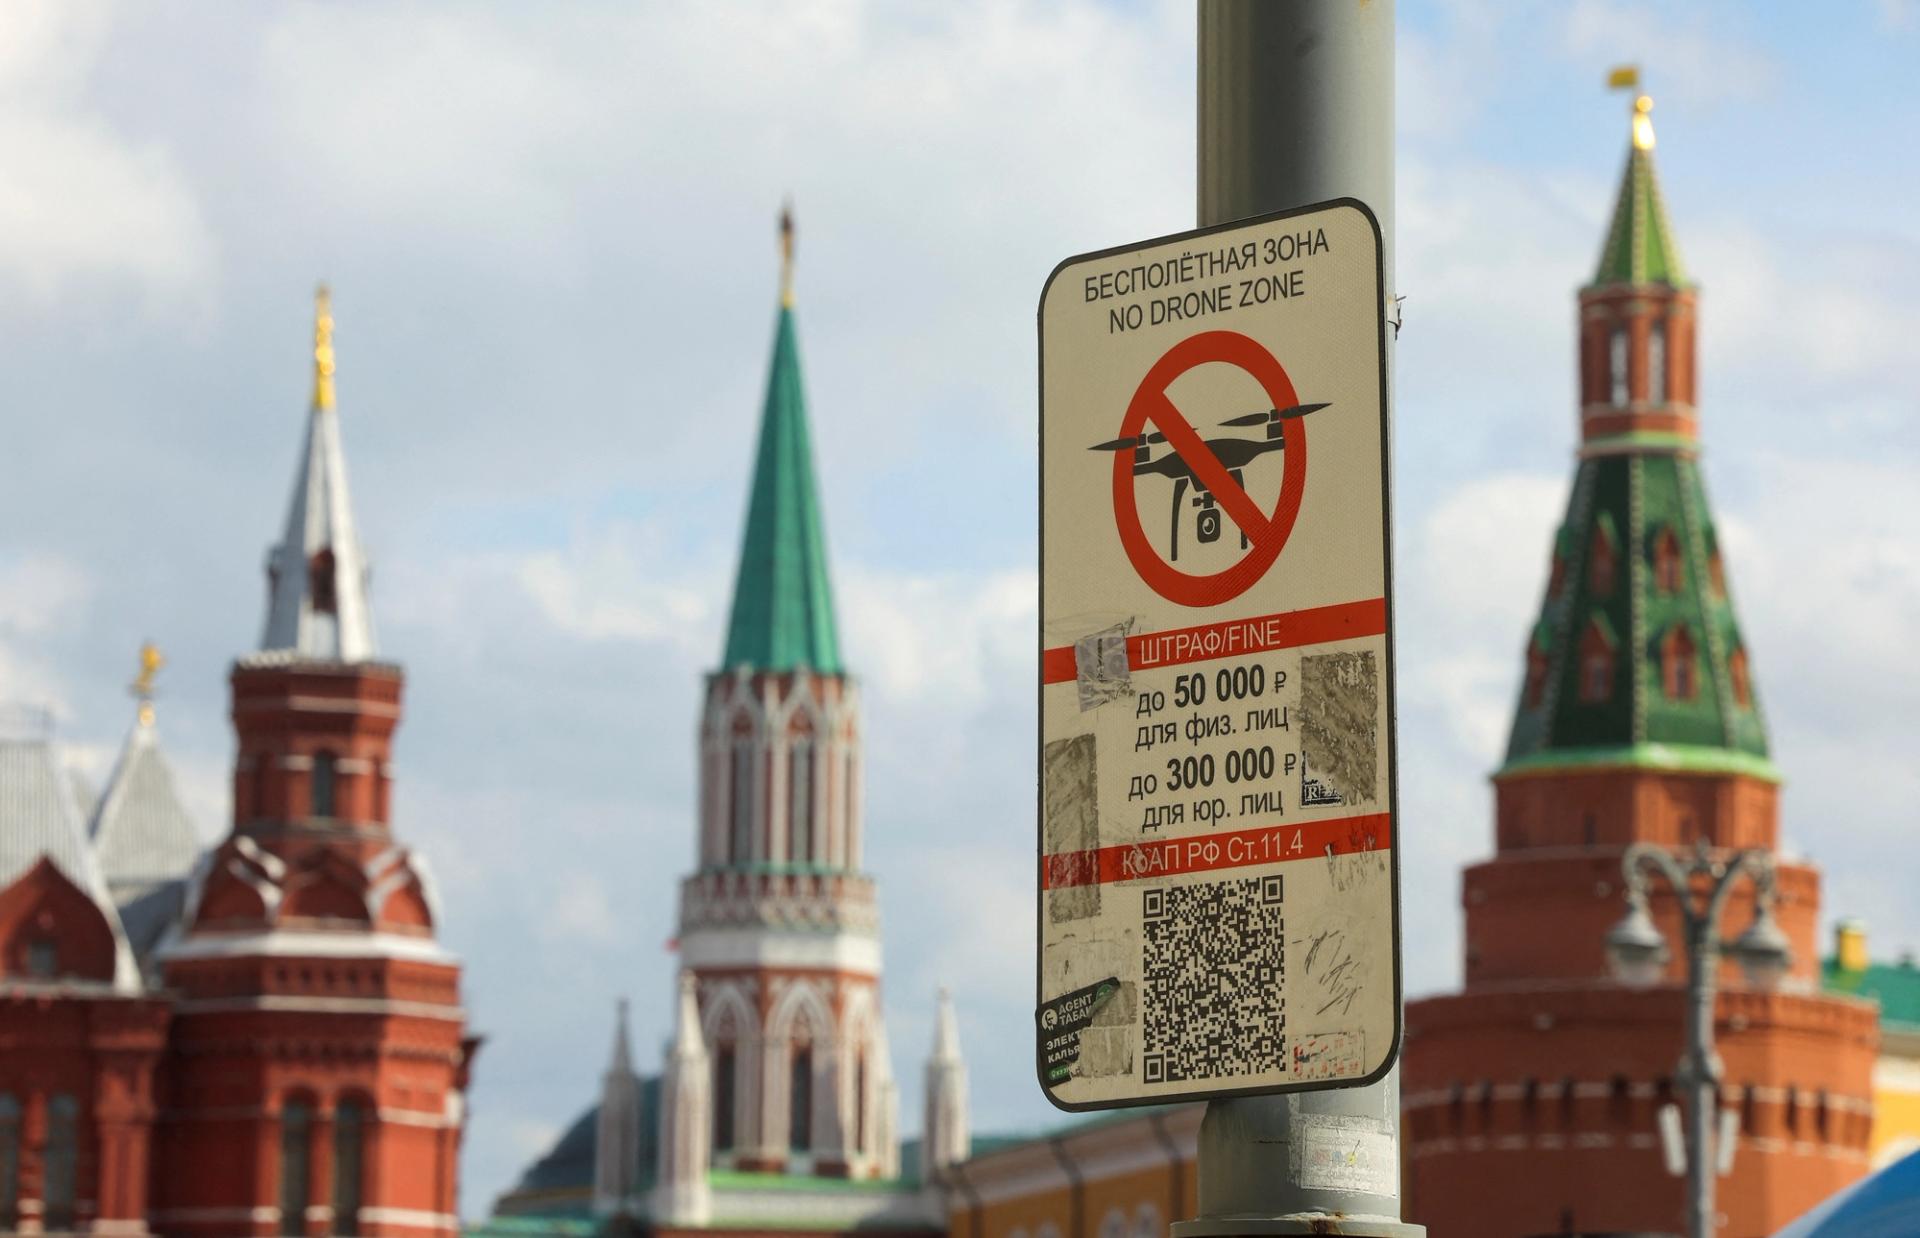 A sign prohibiting unmanned aerial vehicles flying over the area is on display near the State Historical Museum and the Kremlin wall in central Moscow, Russia, May 3, 2023. REUTERS/Evgenia Novozhenina